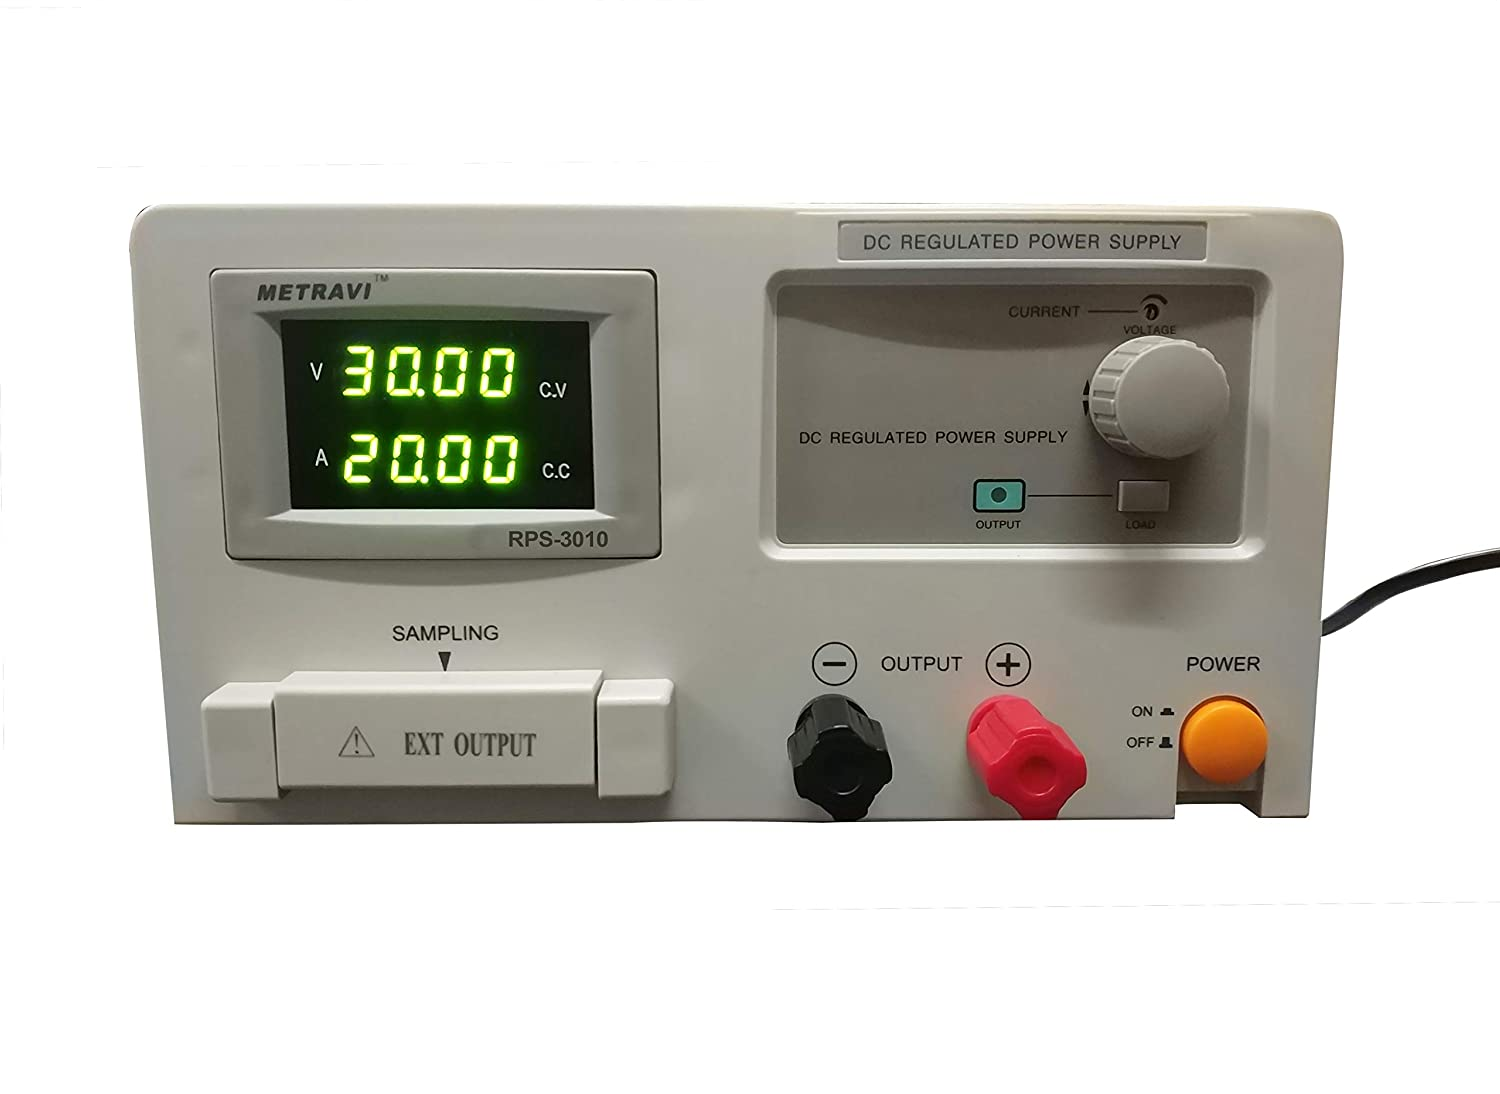 Metravi RPS-3010 DC Regulated Power Supply - Single Output with LED Display of Variable 0-30V / 0-10A DC